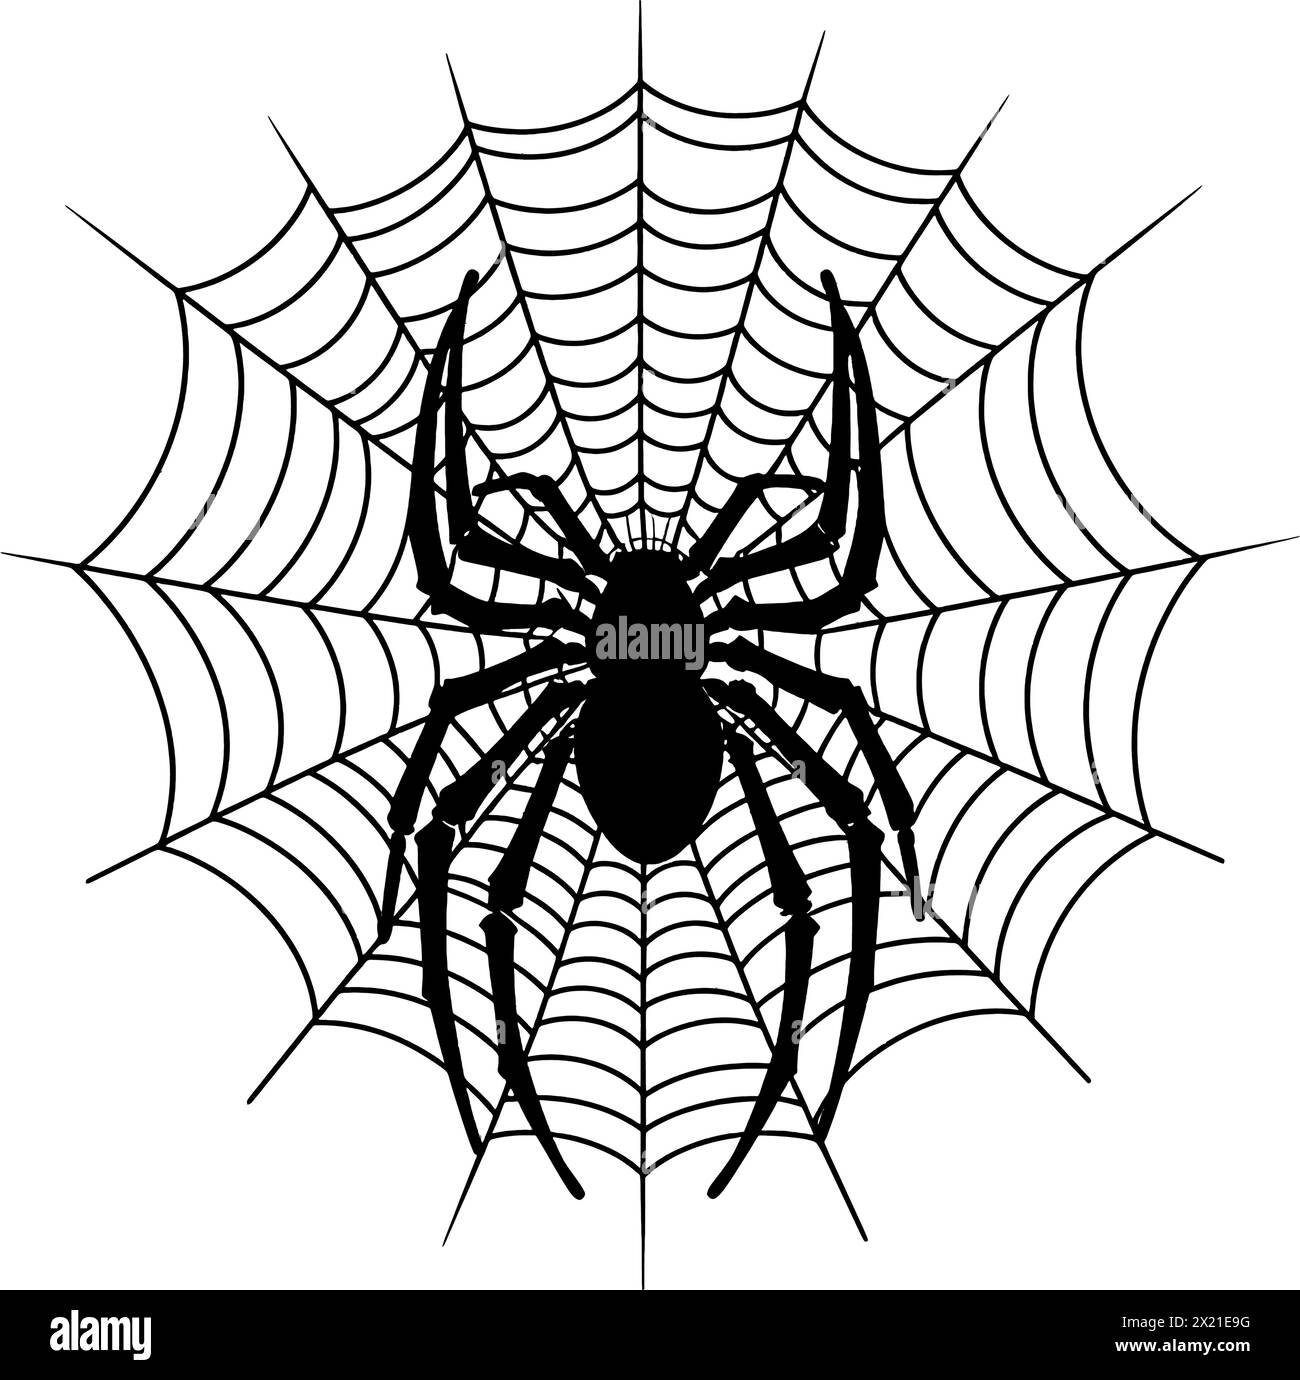 Vector illustration of a spider on a spider web in black silhouette against a clean white background, capturing graceful forms. Stock Vector